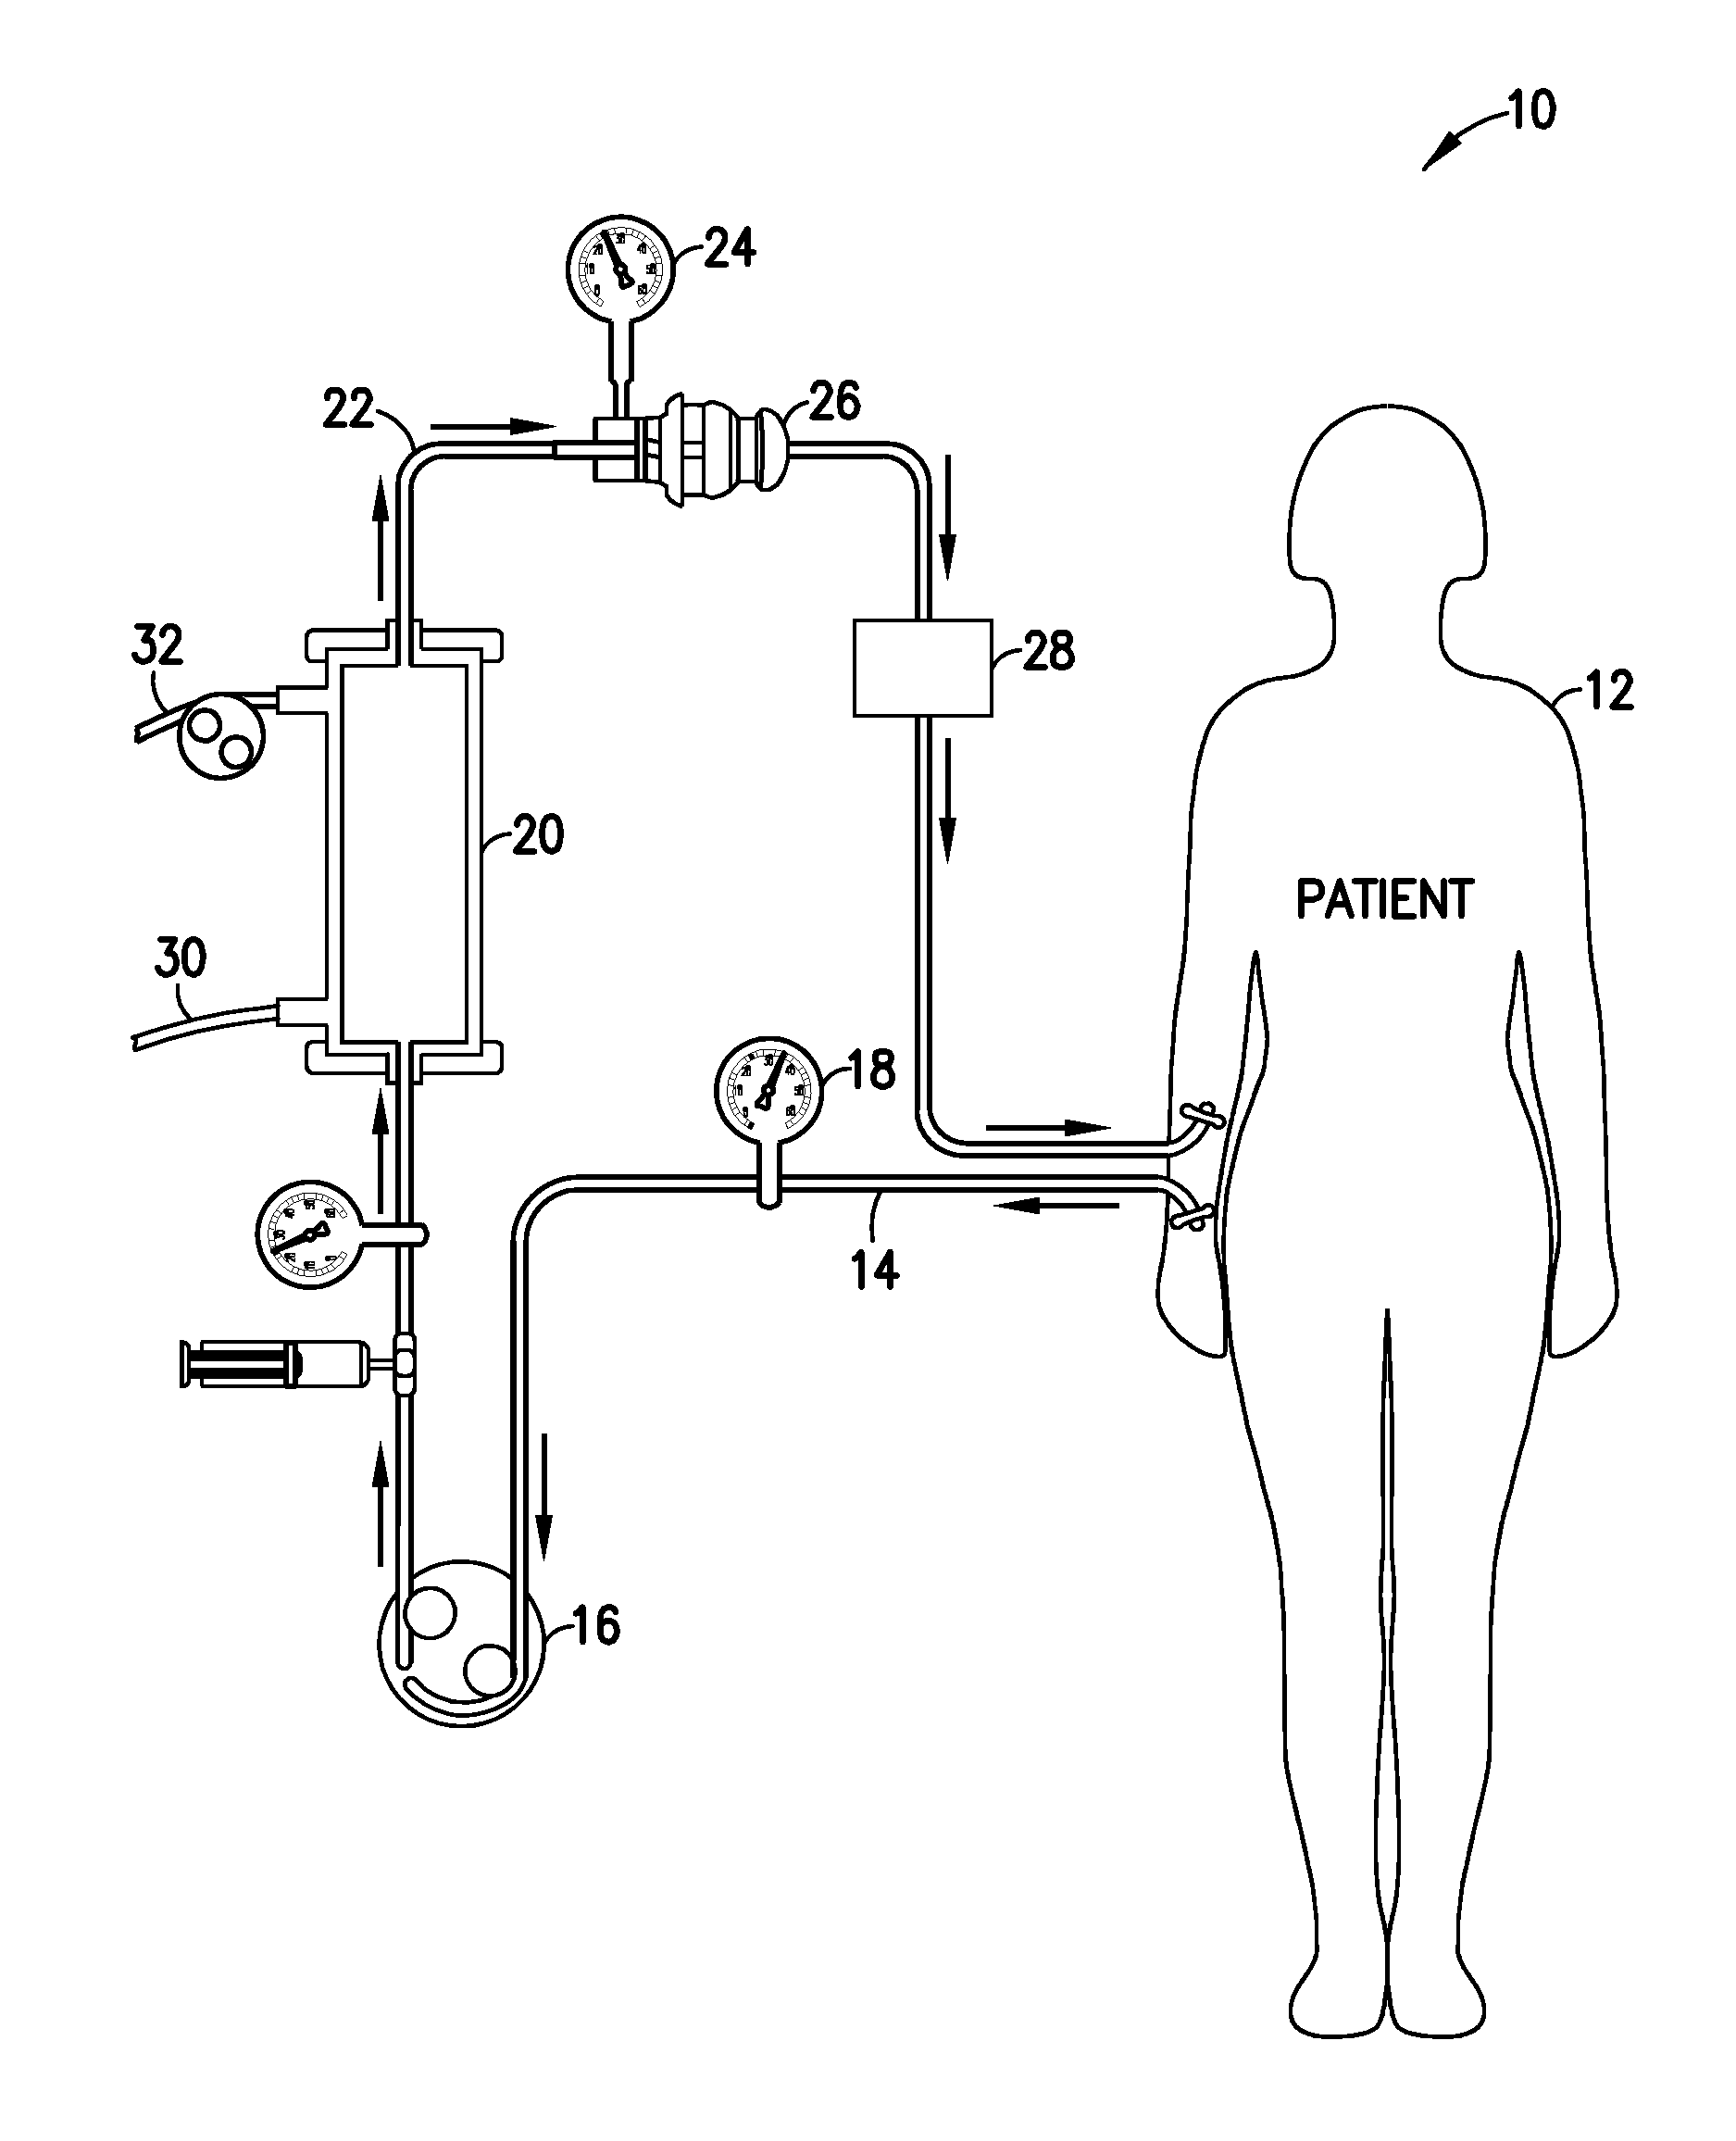 Glucose management and dialysis method and apparatus